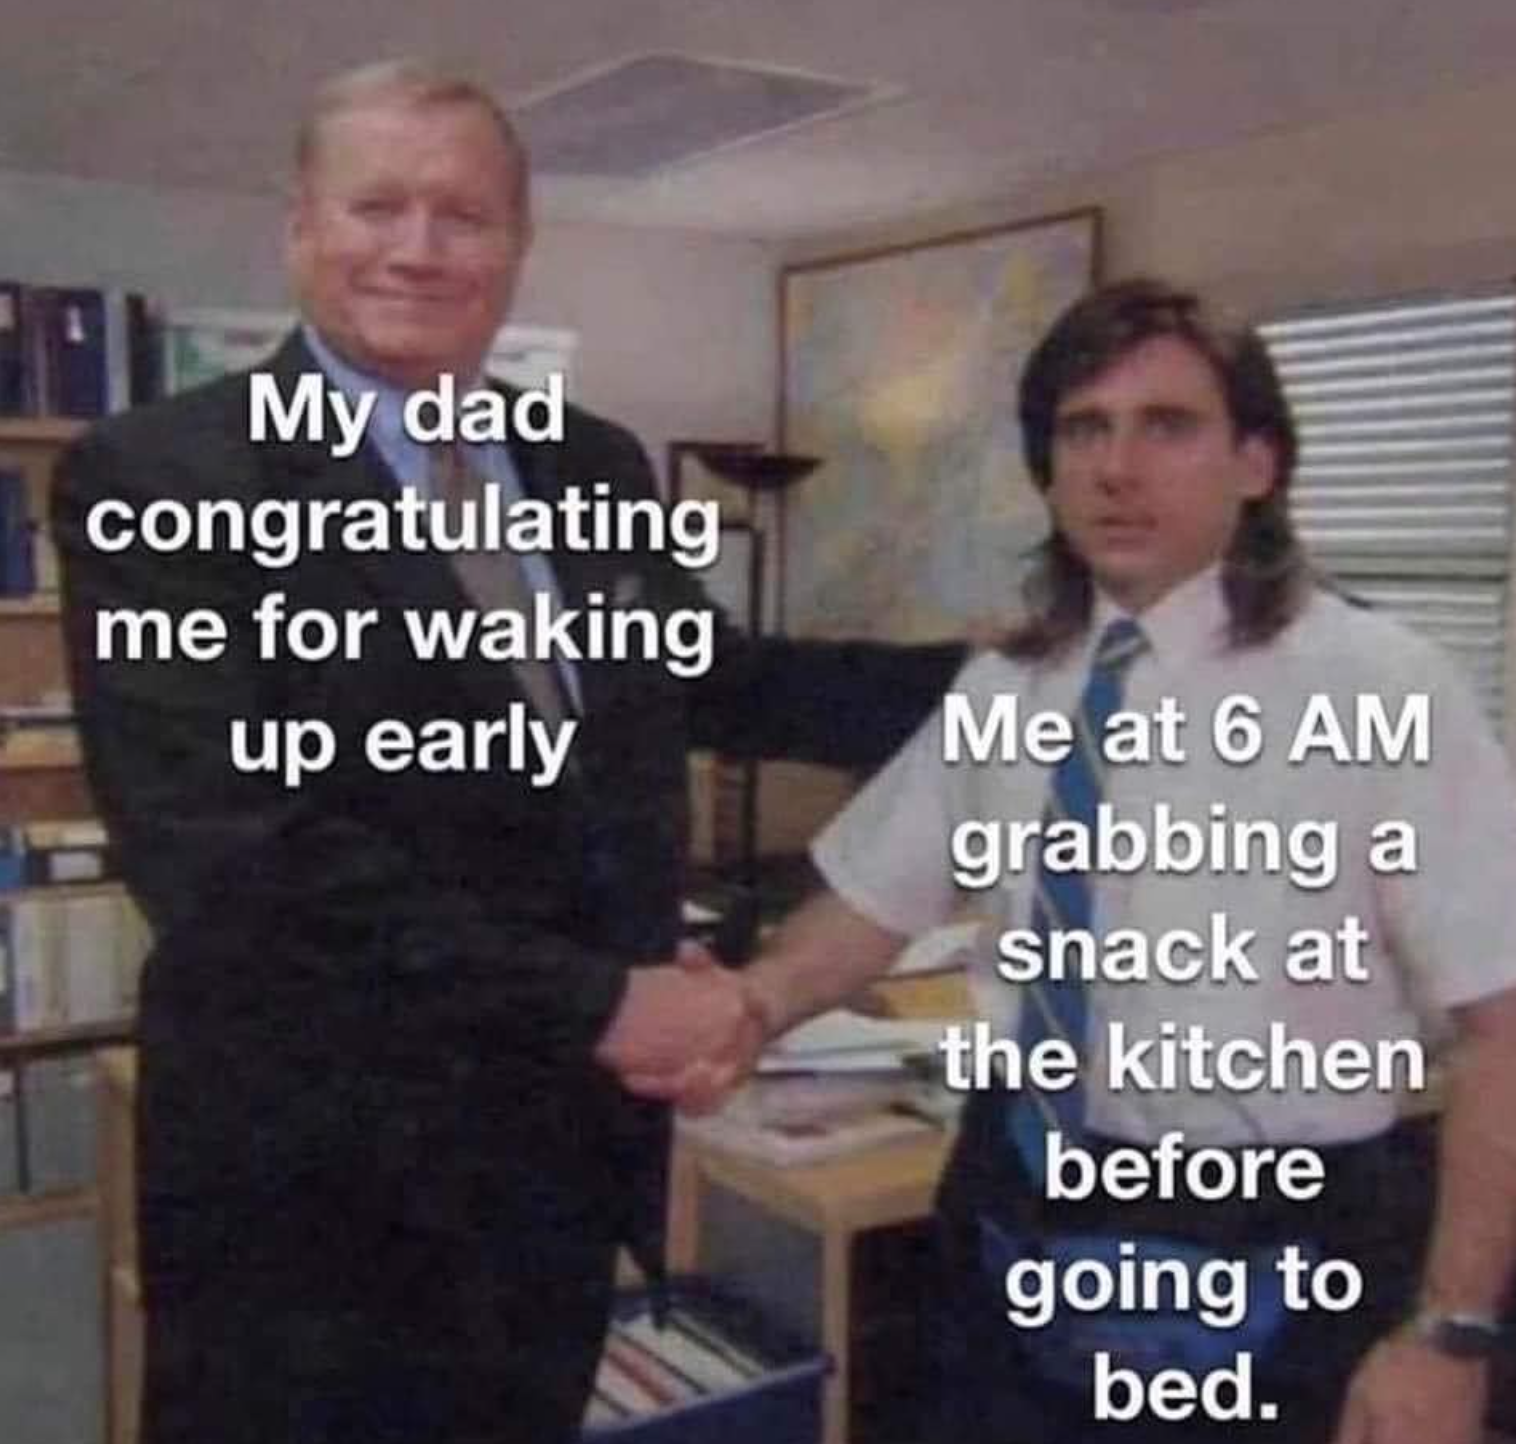 funny gaming memes  - my dad congratulating me for waking up early - My dad congratulating me for waking up early Me at 6 Am grabbing a snack at the kitchen before going to bed.